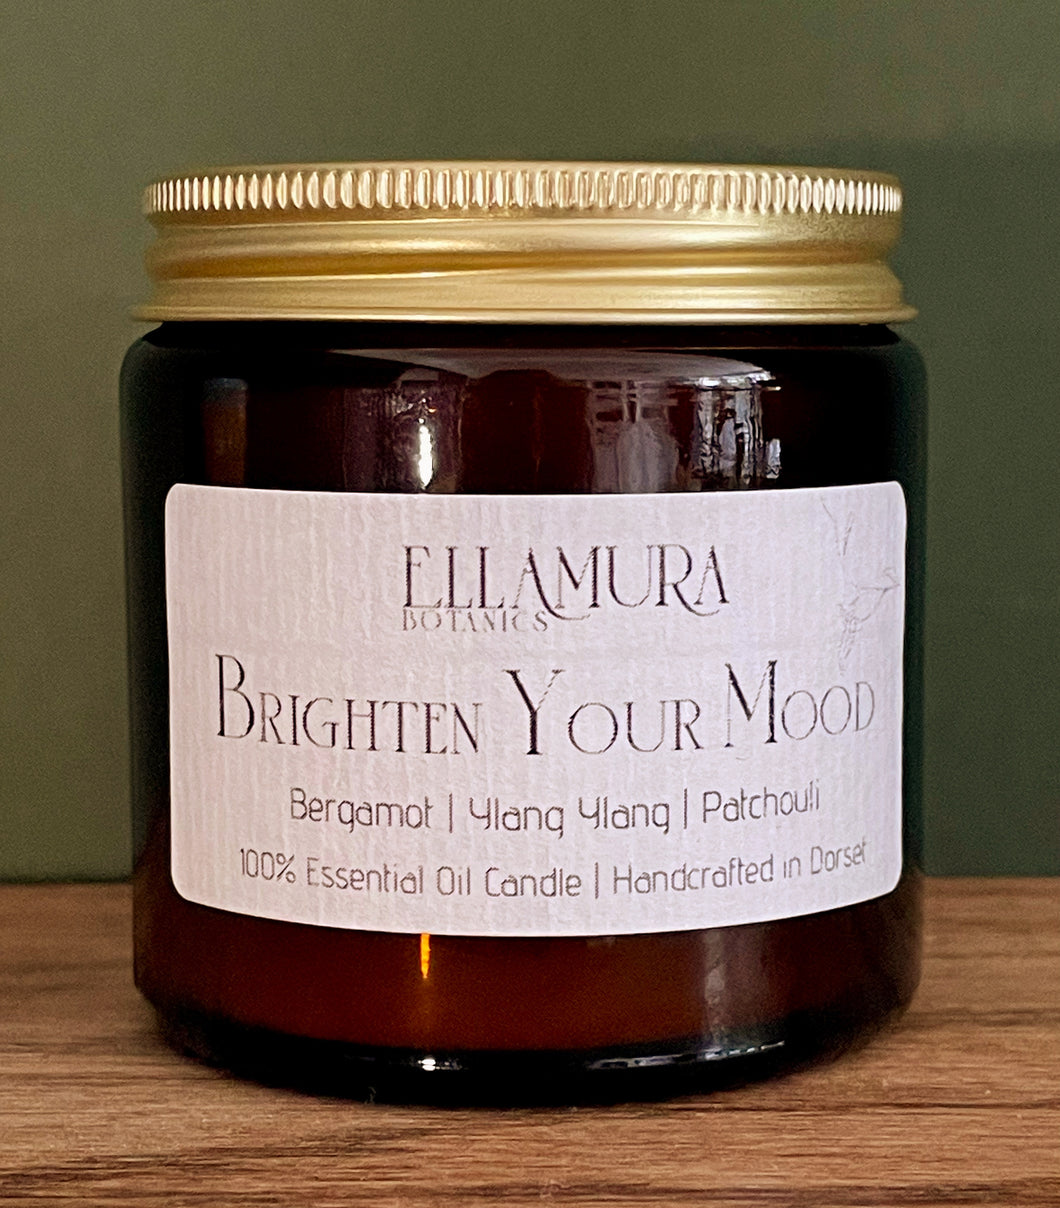 Brighten Your Mood Essential Oil Candle